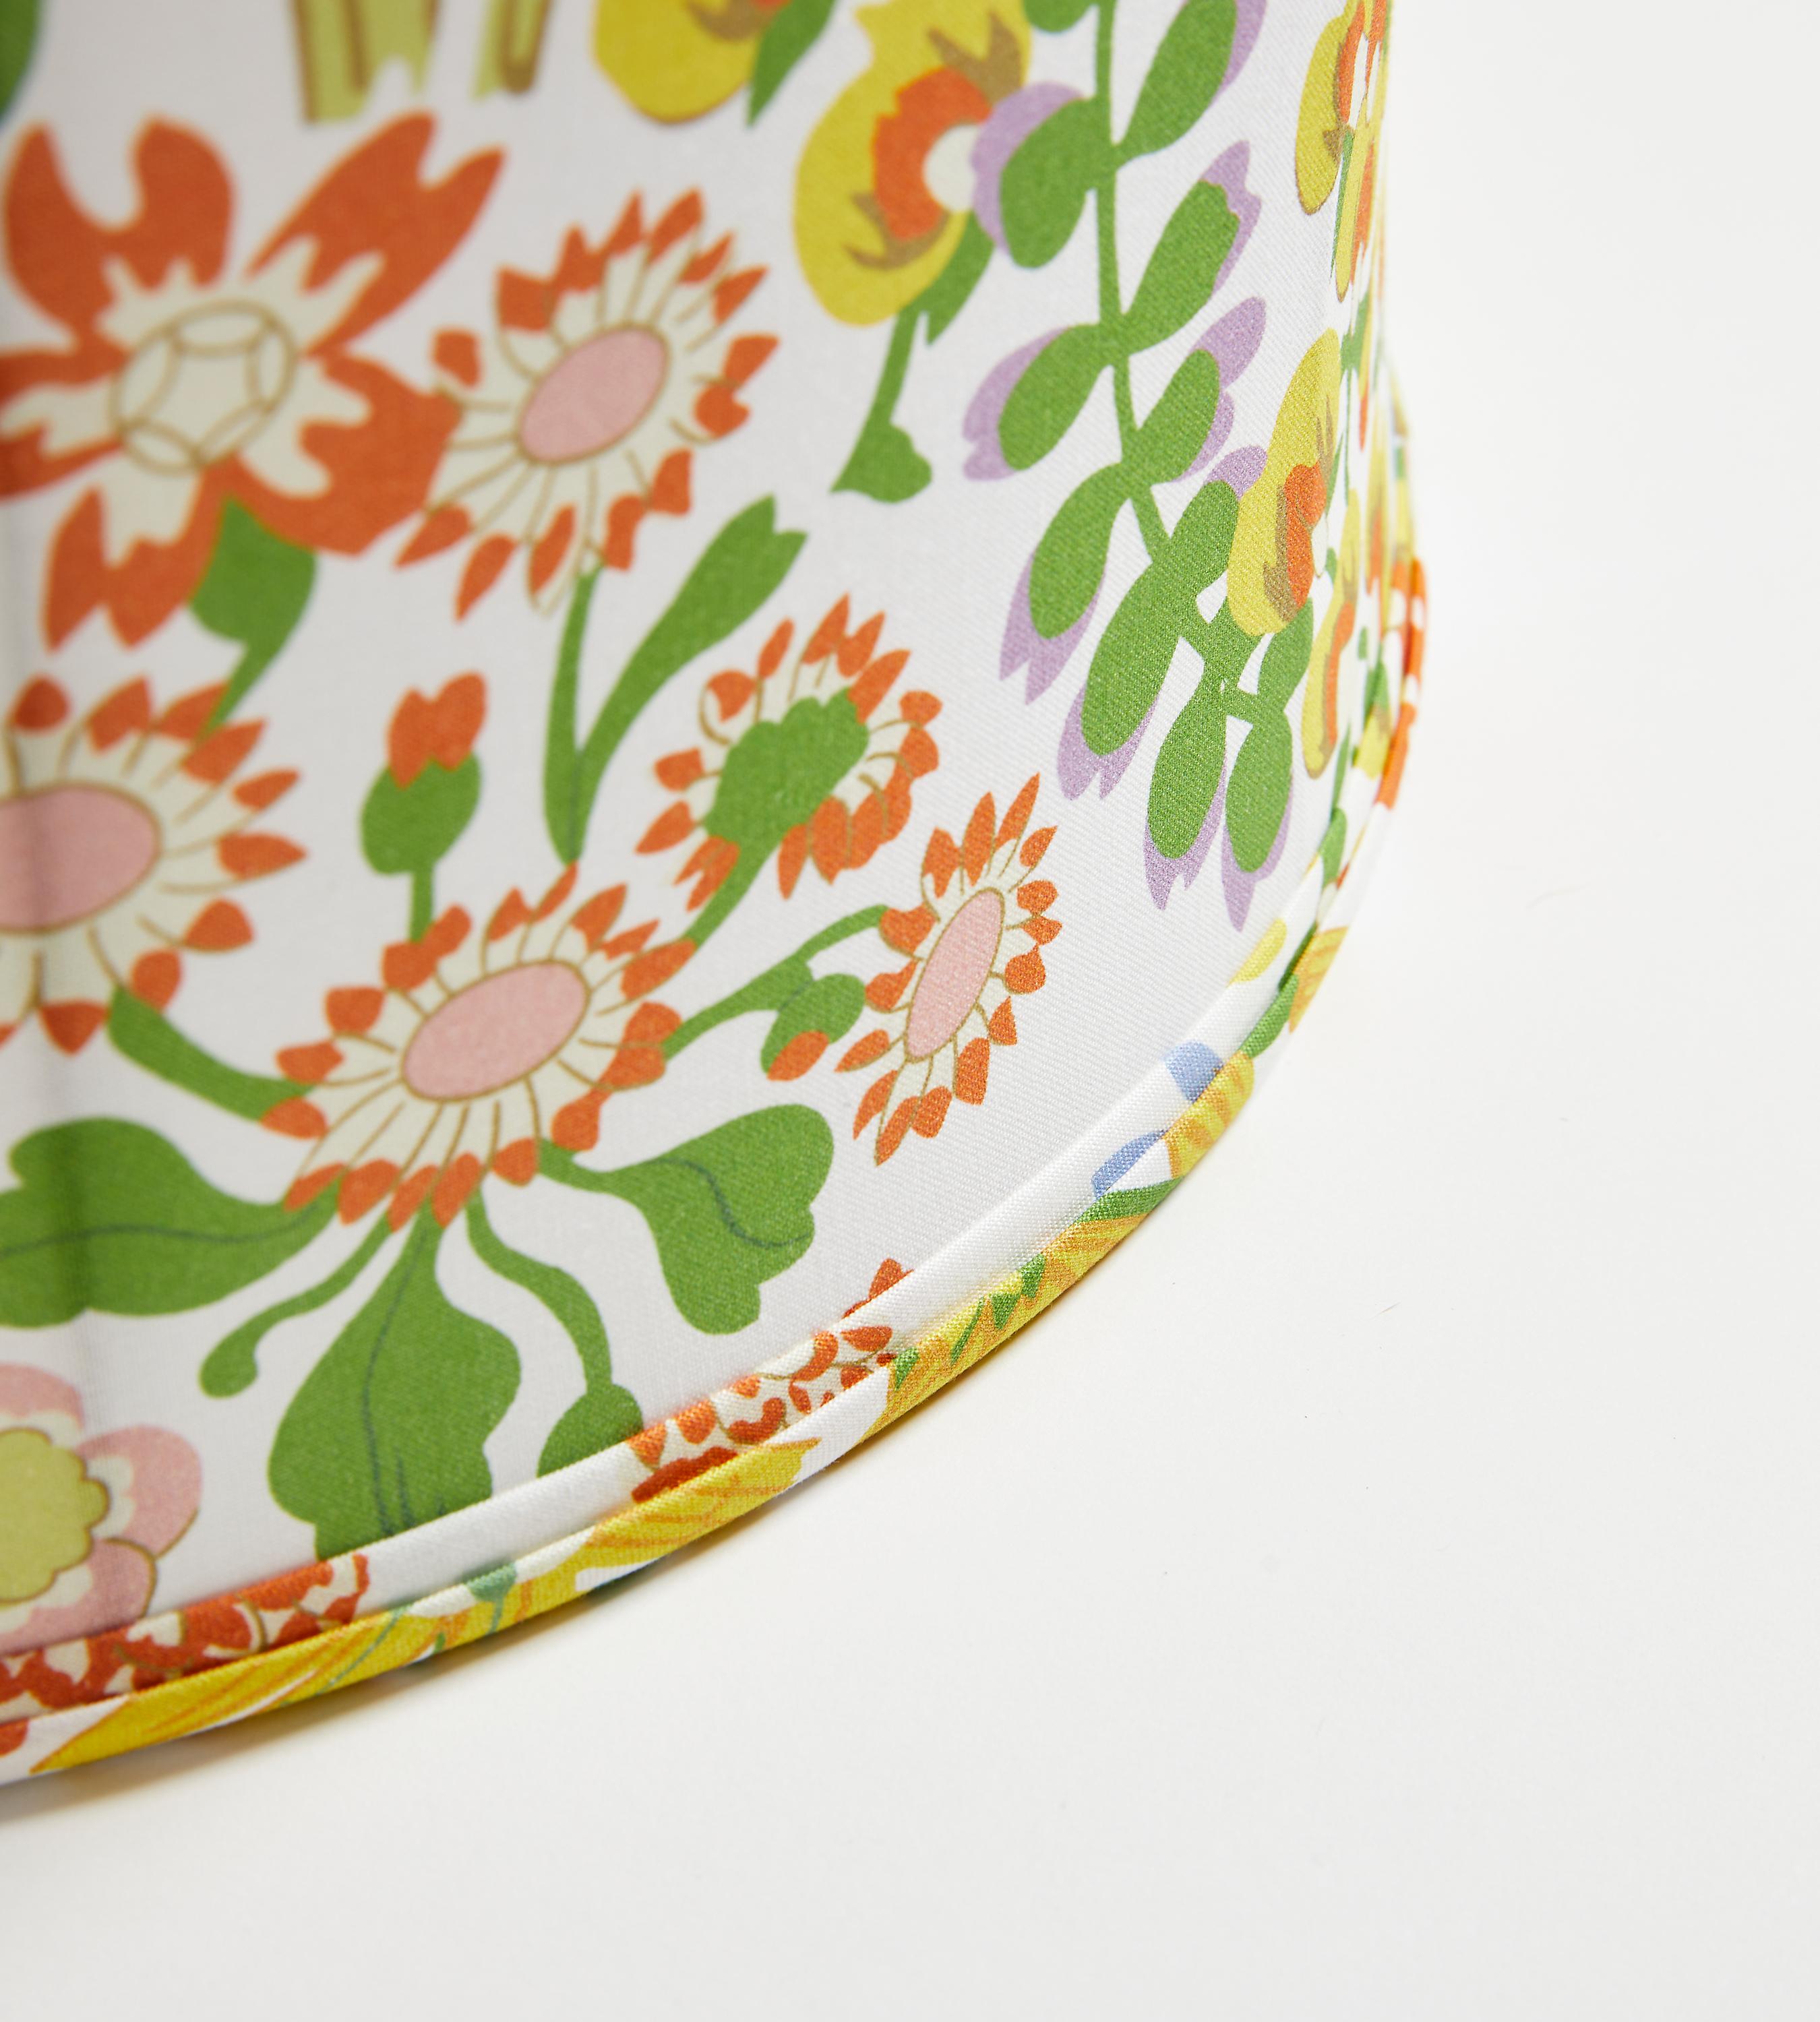 Nymph Floral, a well-loved pattern from Grey Watkins, is available in printed fabric, luxurious pillows, and now, beautiful, handcrafted lampshades in drum and pleated styles. A fresh interpretation of a 17th century Russian document, this graceful